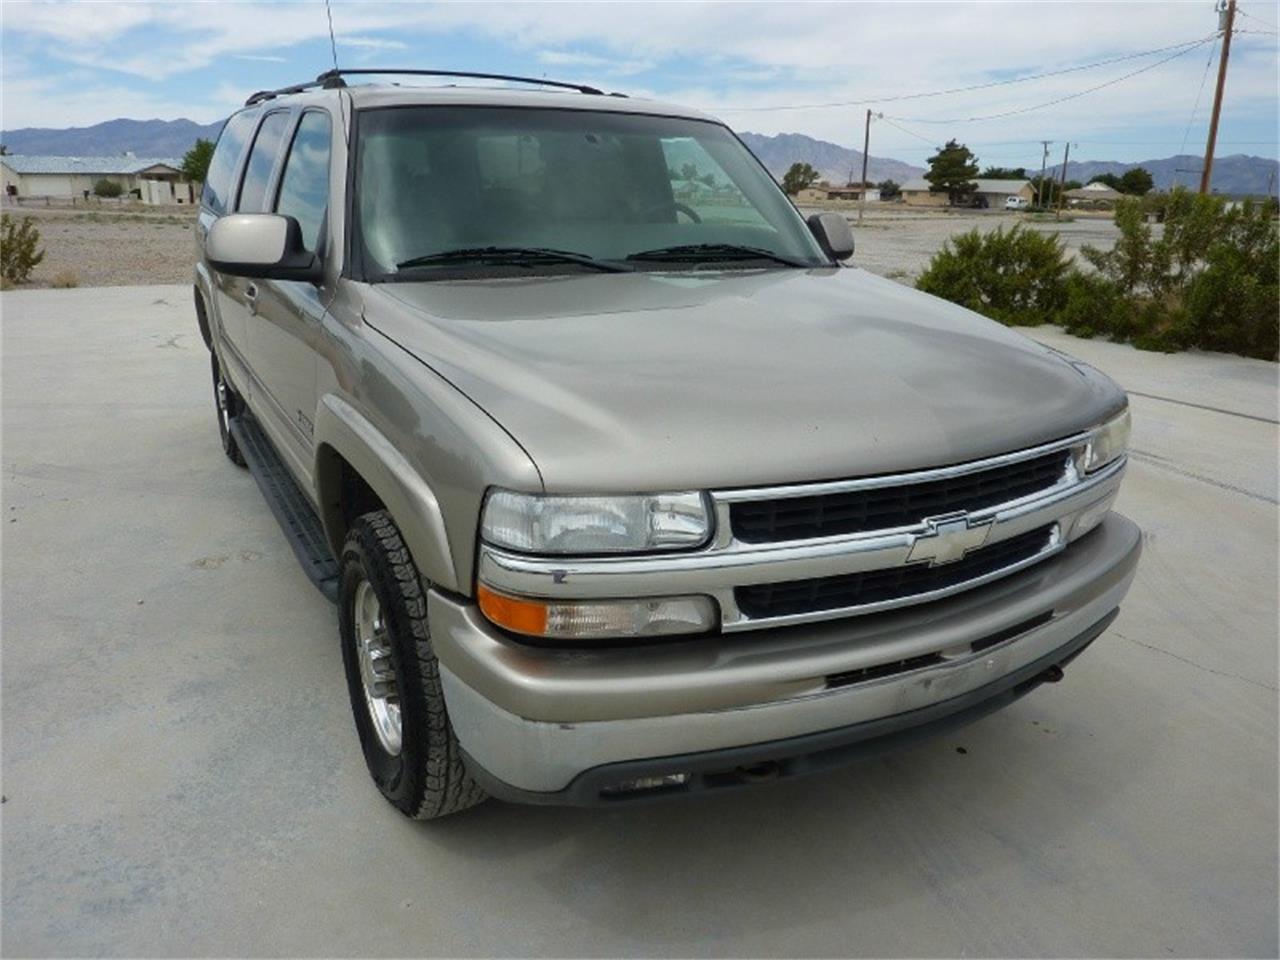 2001 Chevrolet Suburban for sale in Pahrump, NV – photo 4